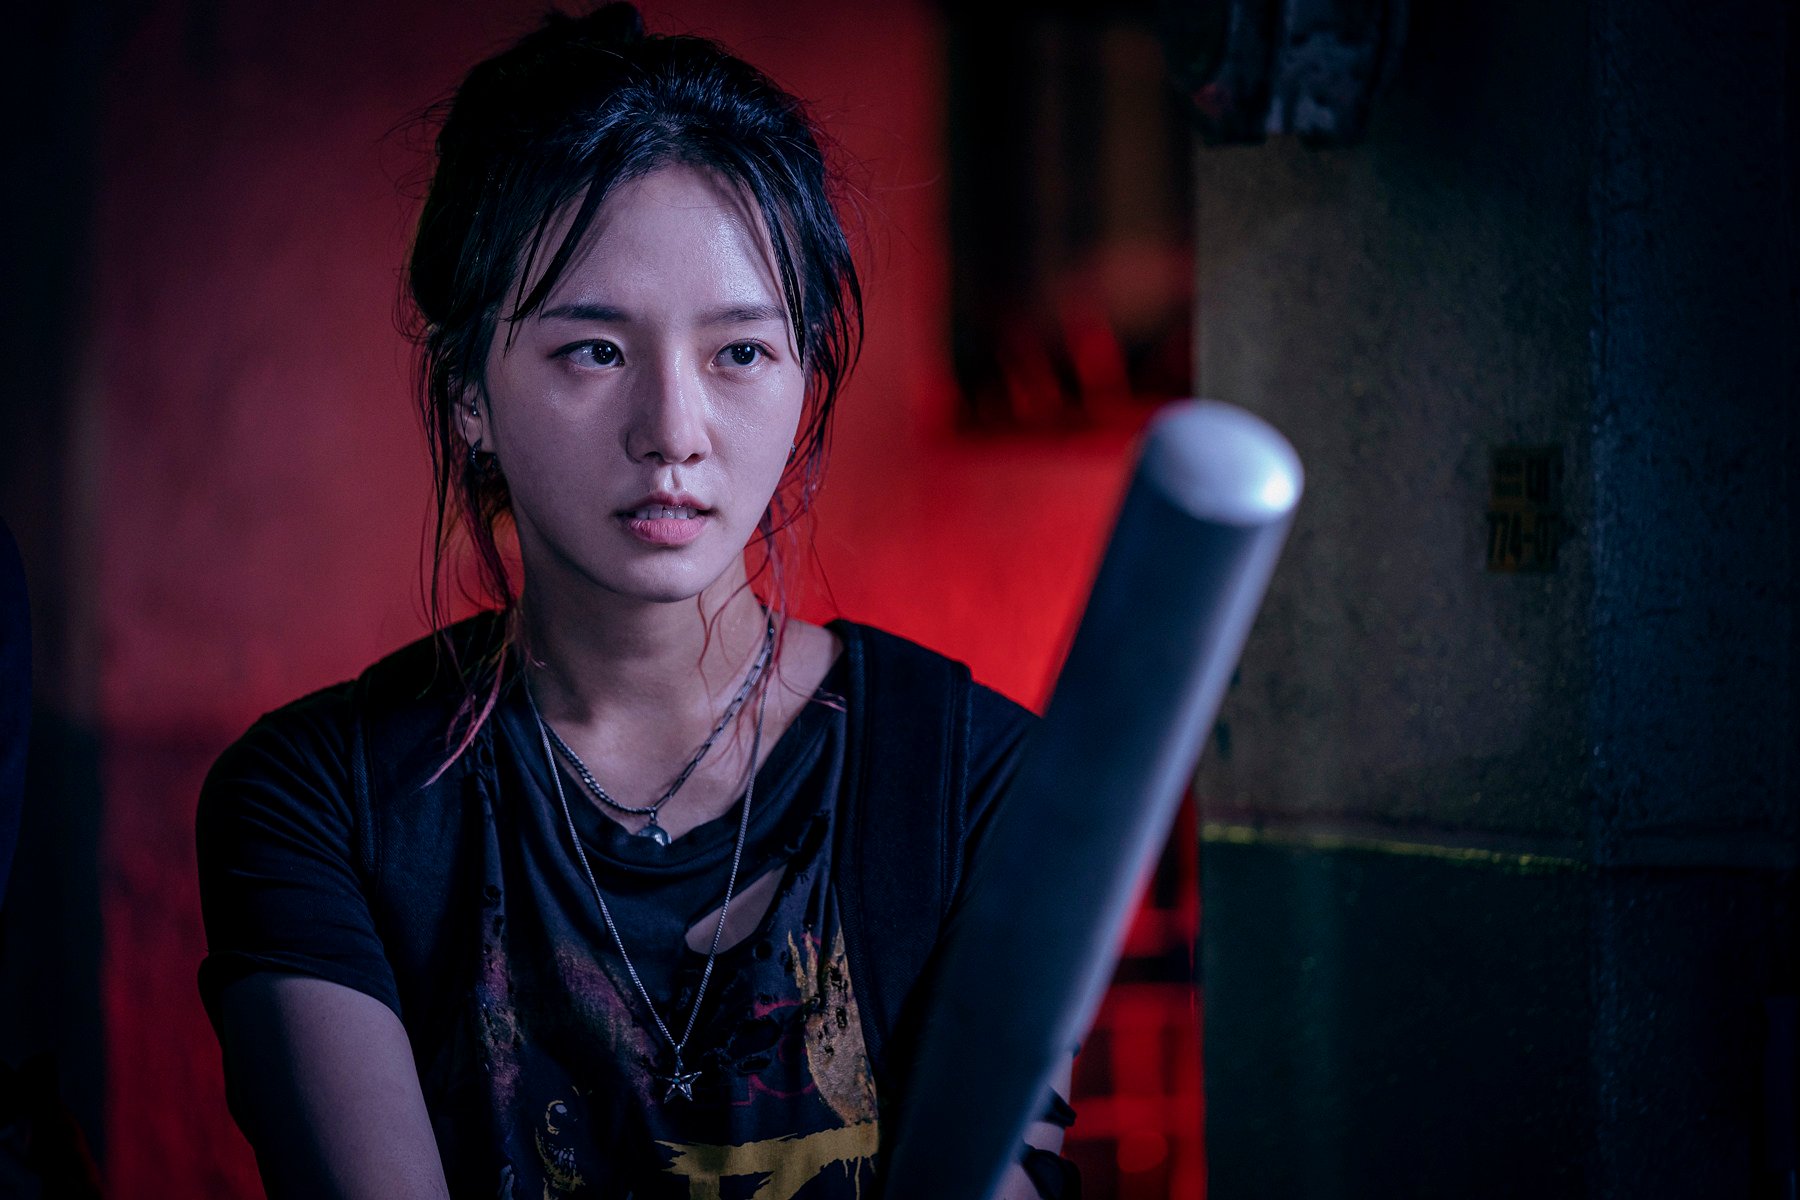 Park Gyu-young in horror series “Sweet Home”. She has joined the cast for season two of Netflix K-drama hit “Squid Game”.